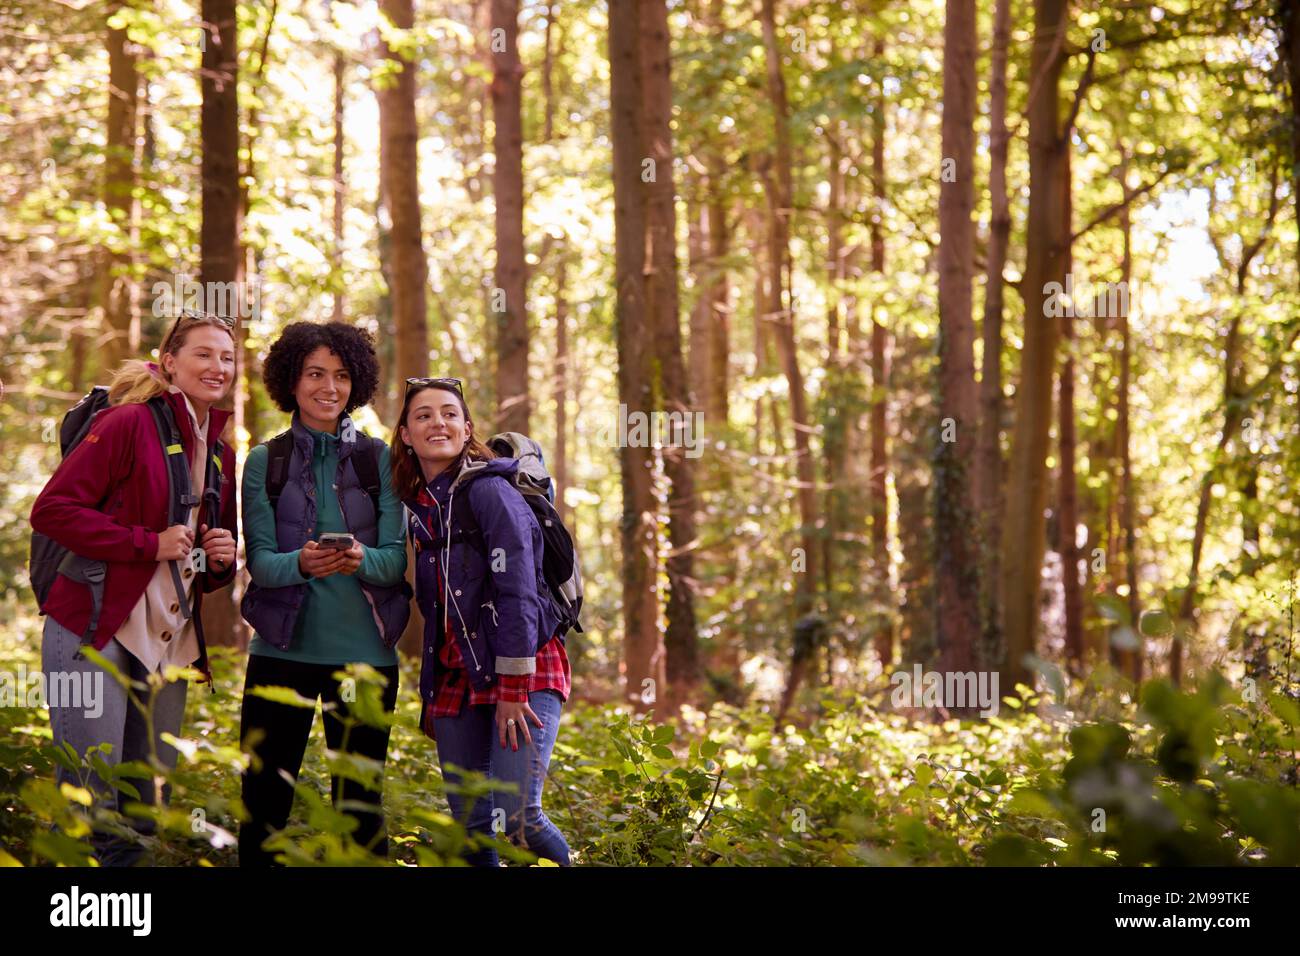 Female Friends With Mobile Phone On Holiday Hiking Through Woods Using GPS App To Navigate Stock Photo